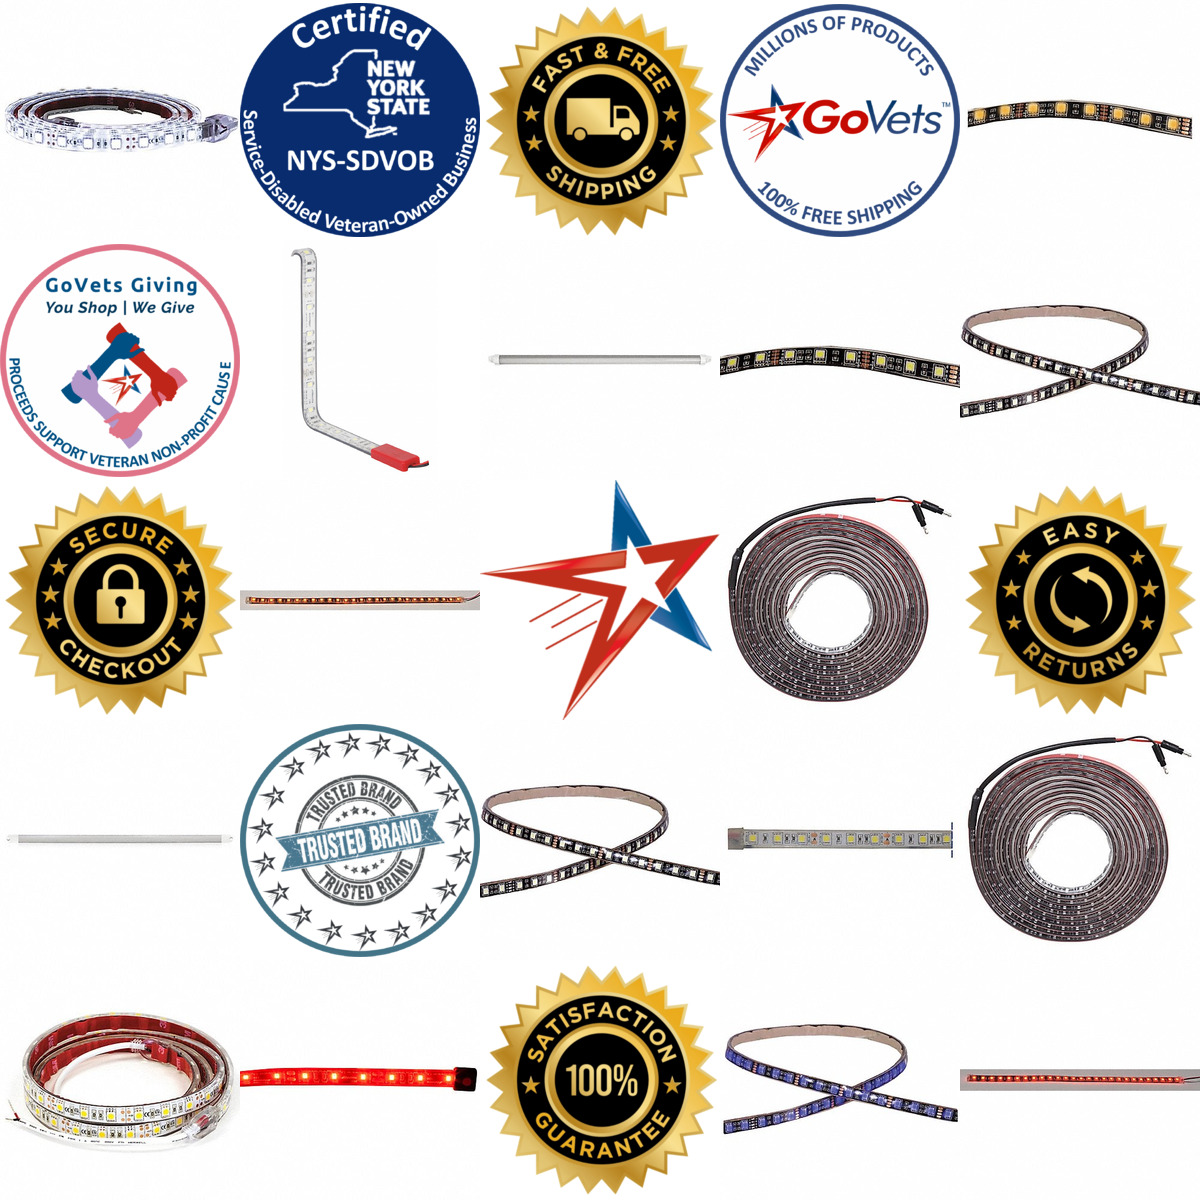 A selection of Automotive Lighting Strip products on GoVets